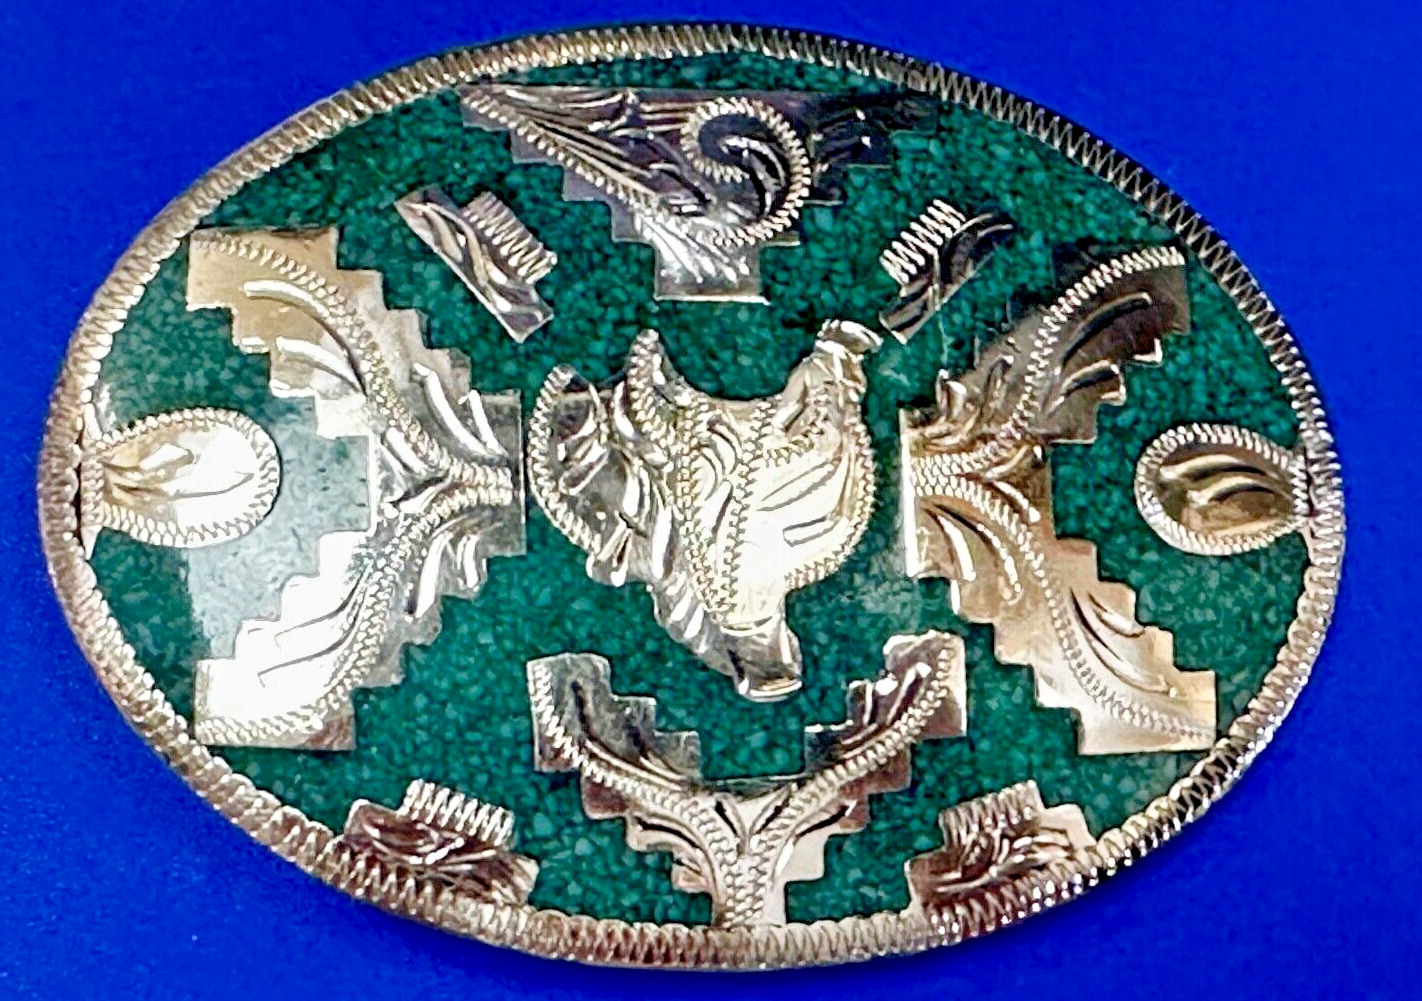 Beautiful Horse Saddle Alpaca Inlaid Southwestern Belt Buckle see magnified view